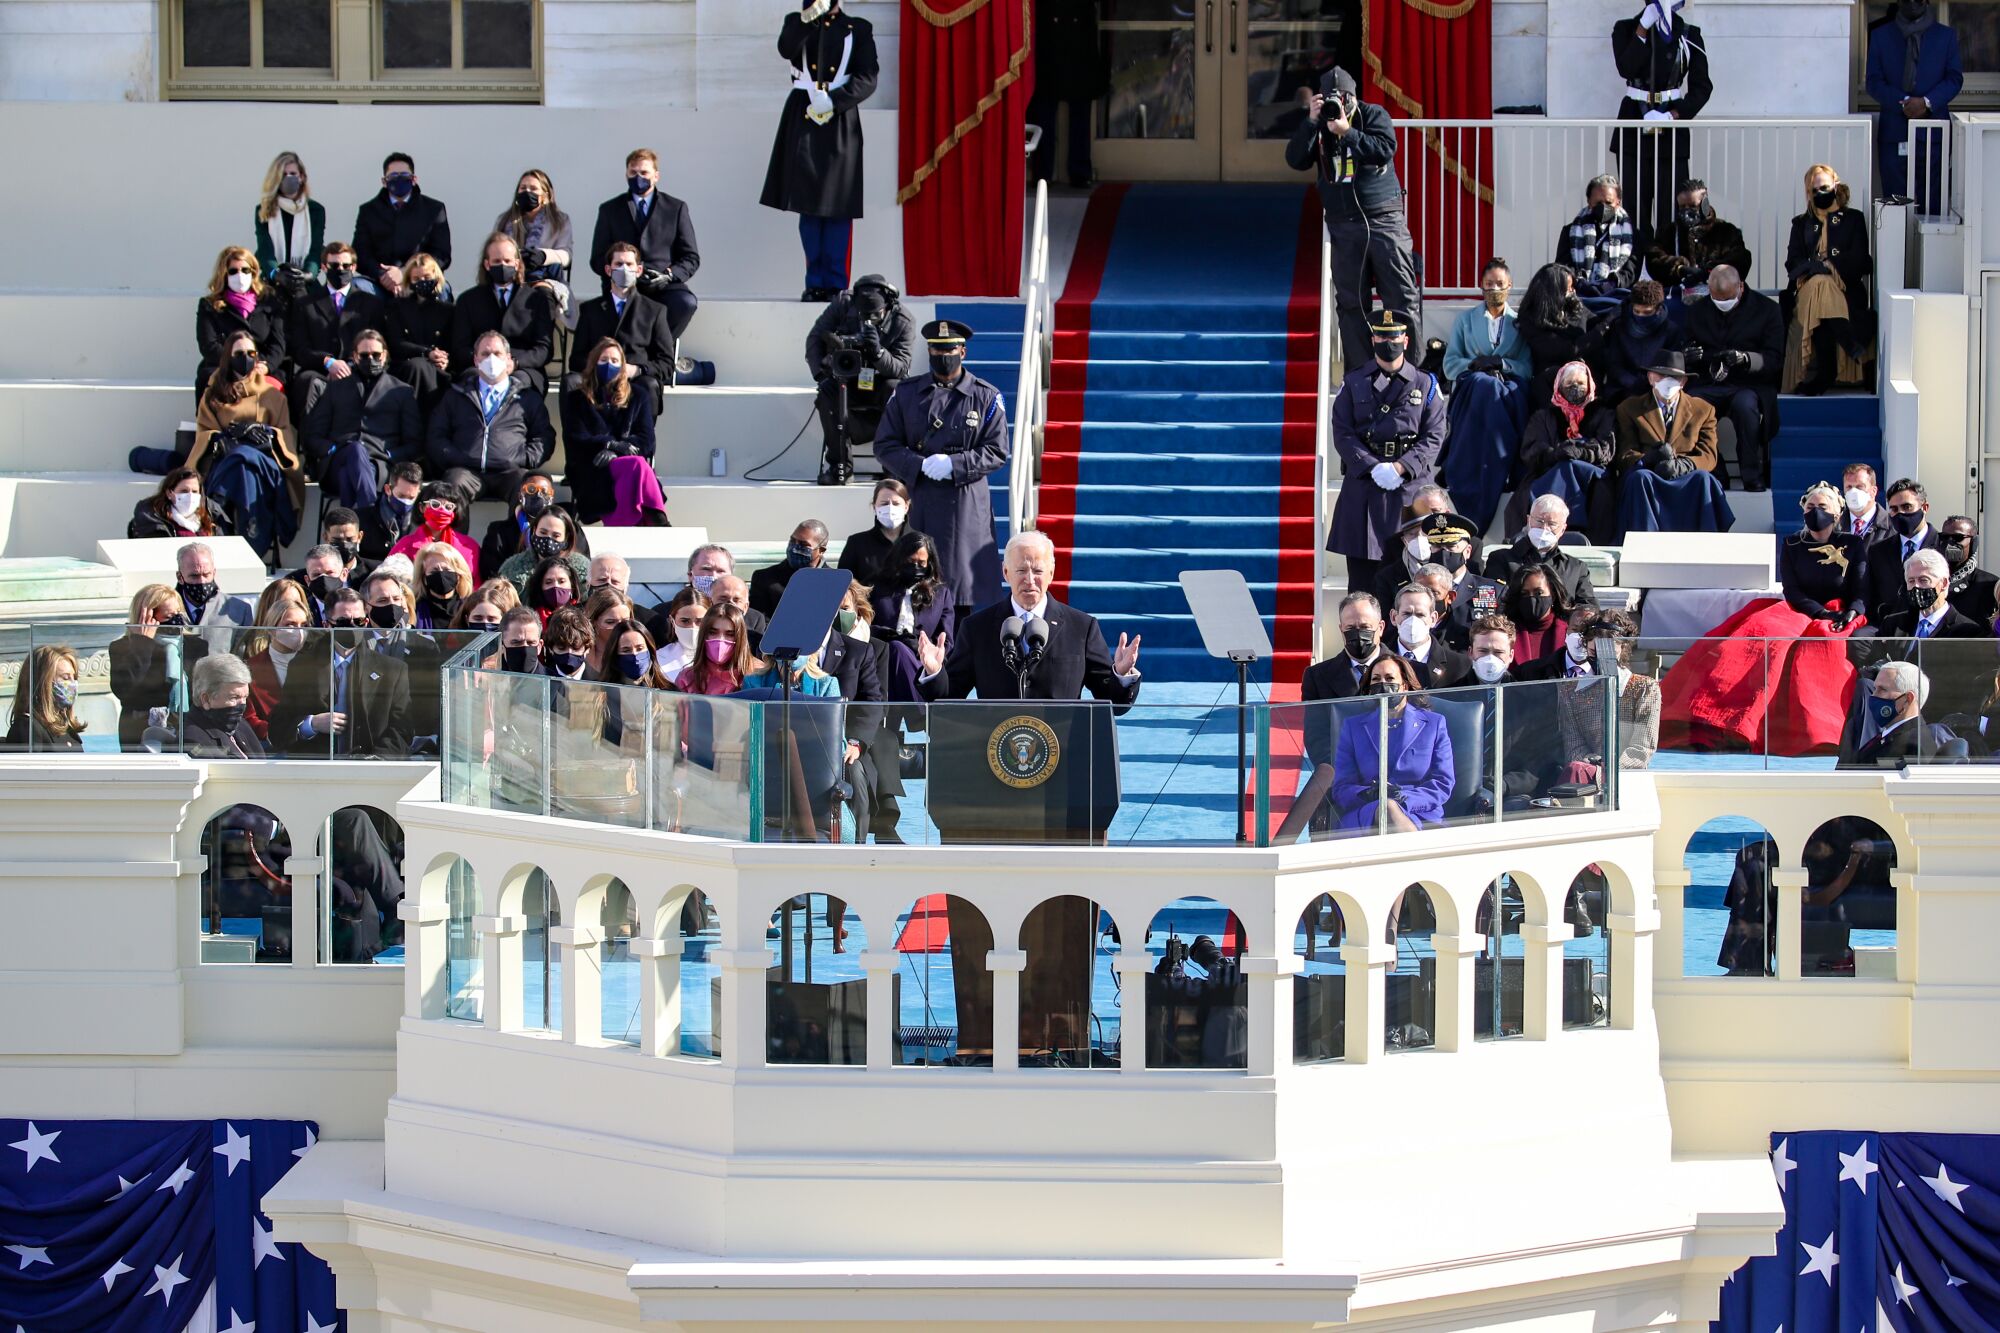 President Biden delivers his inaugural address on the West Front of the U.S. Capitol.